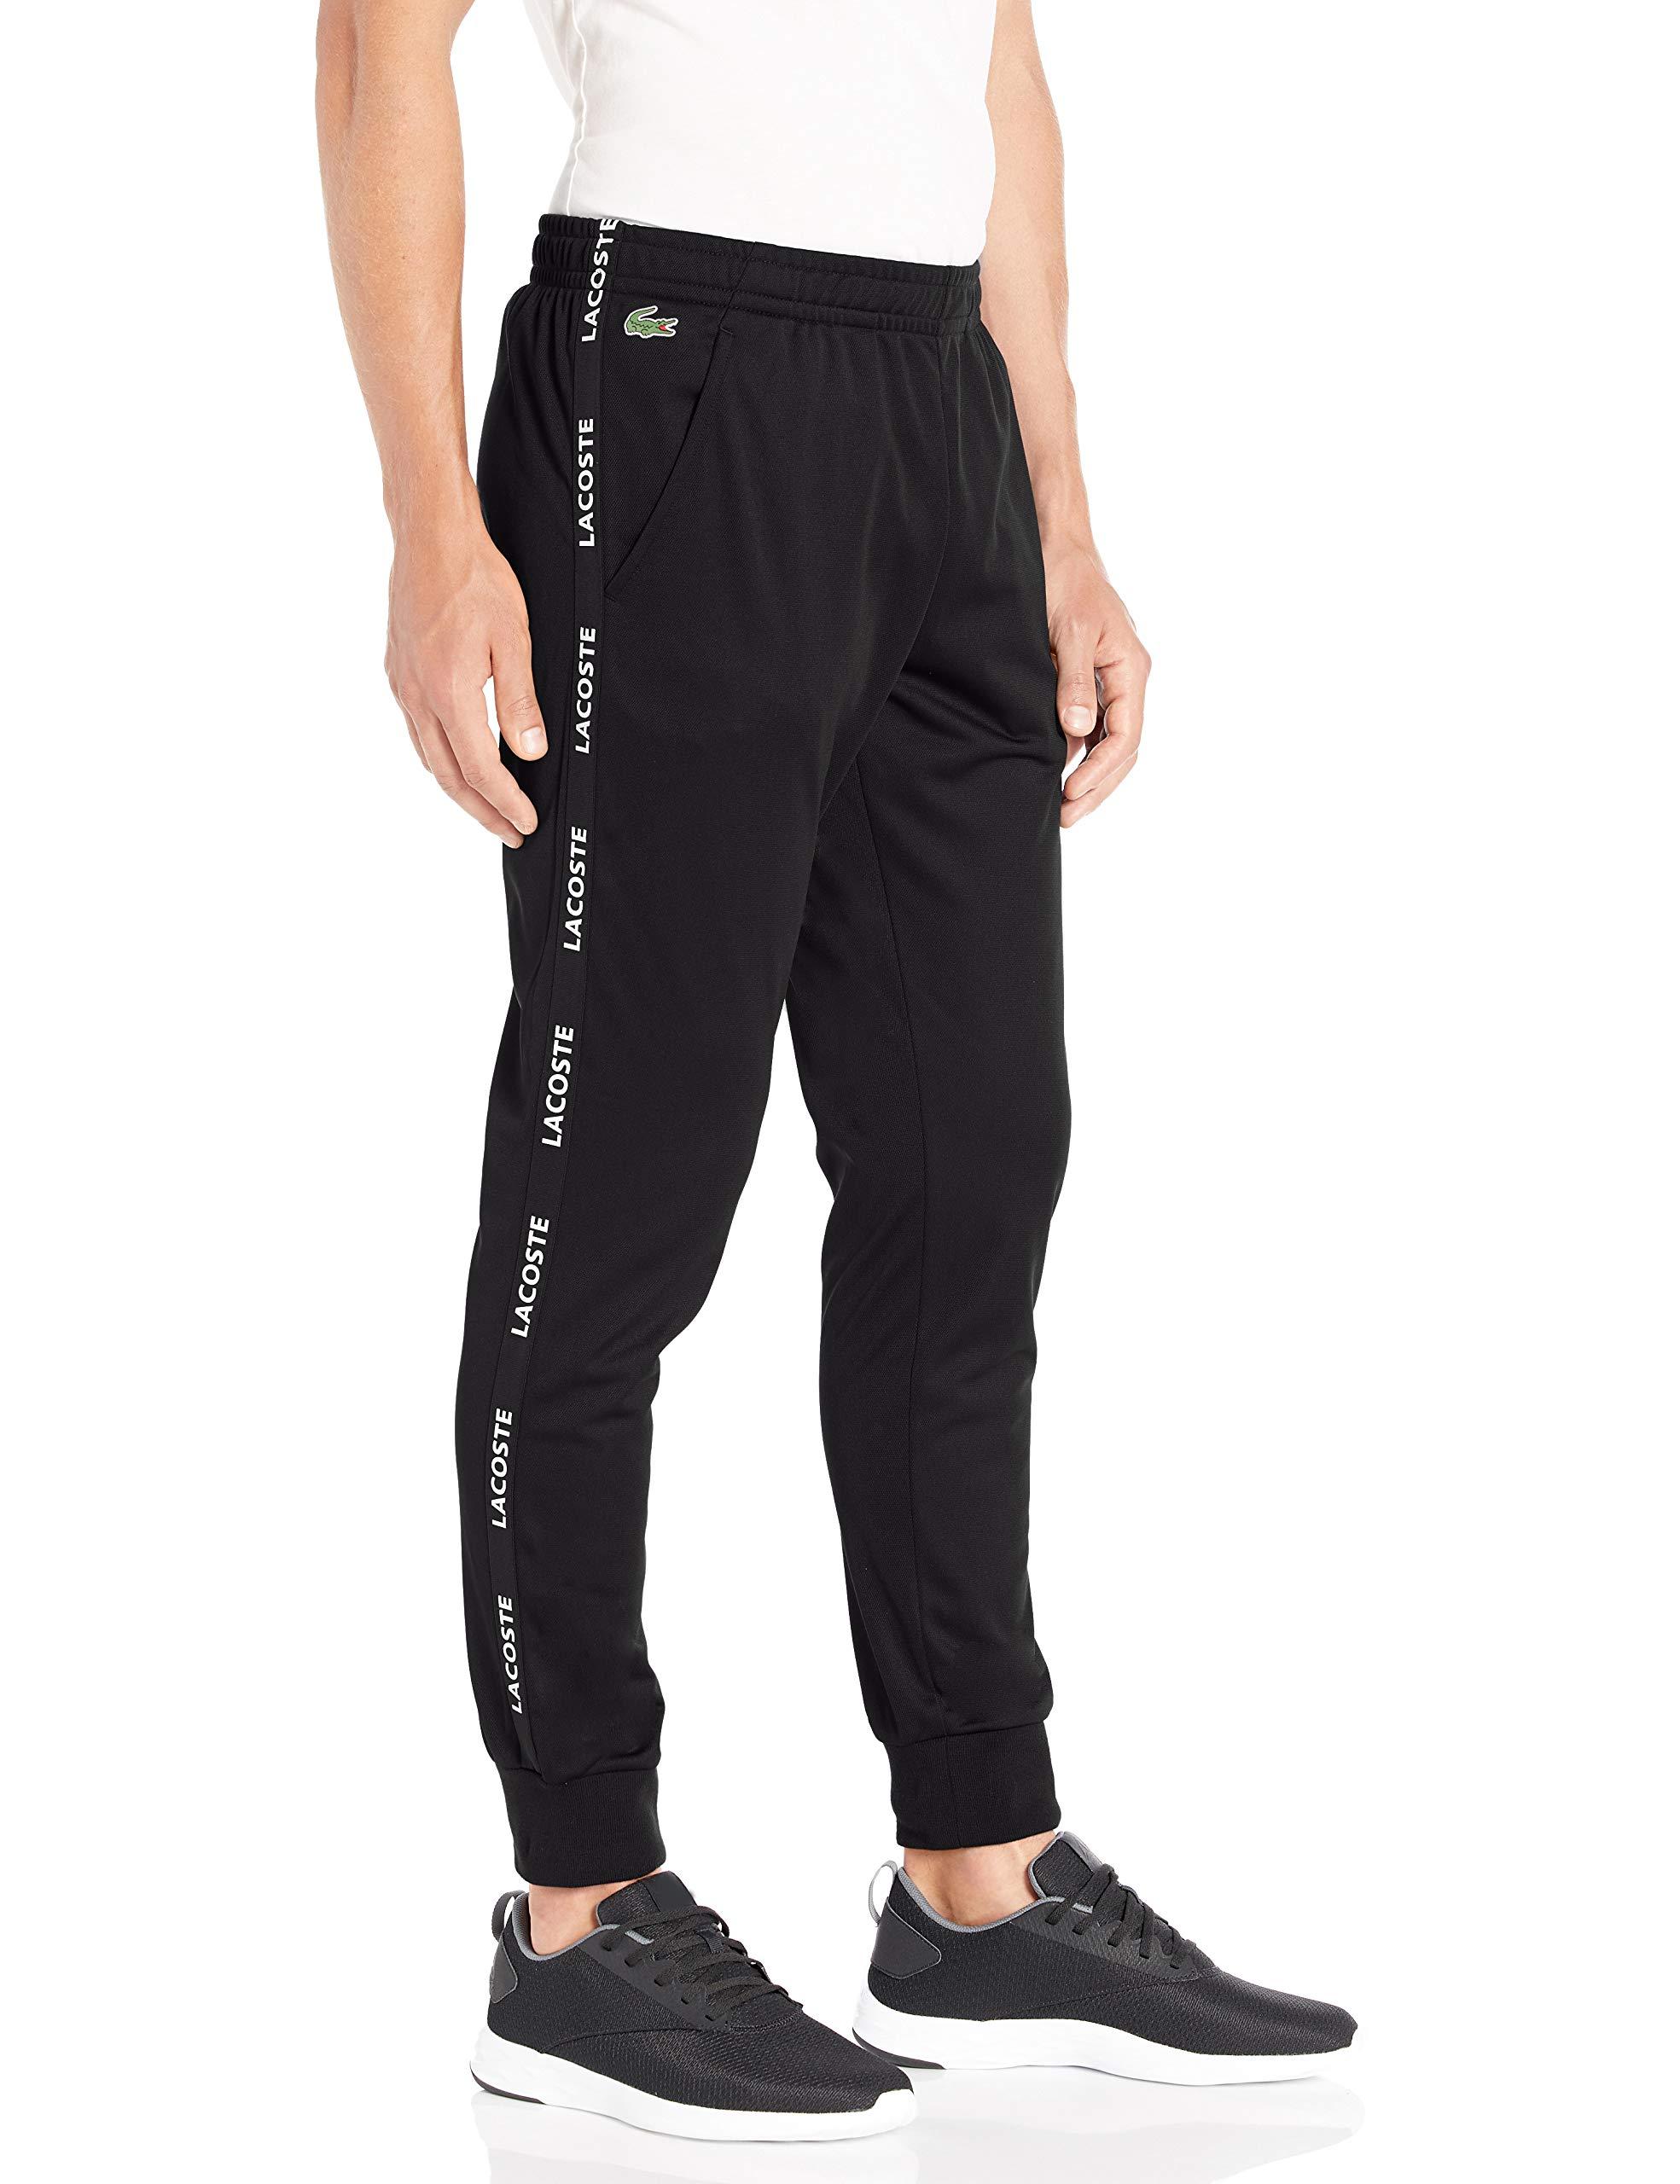 Lacoste S Sport With Side Taping Tricot Pant Track Pants in  Black/Black/White (Black) for Men - Lyst